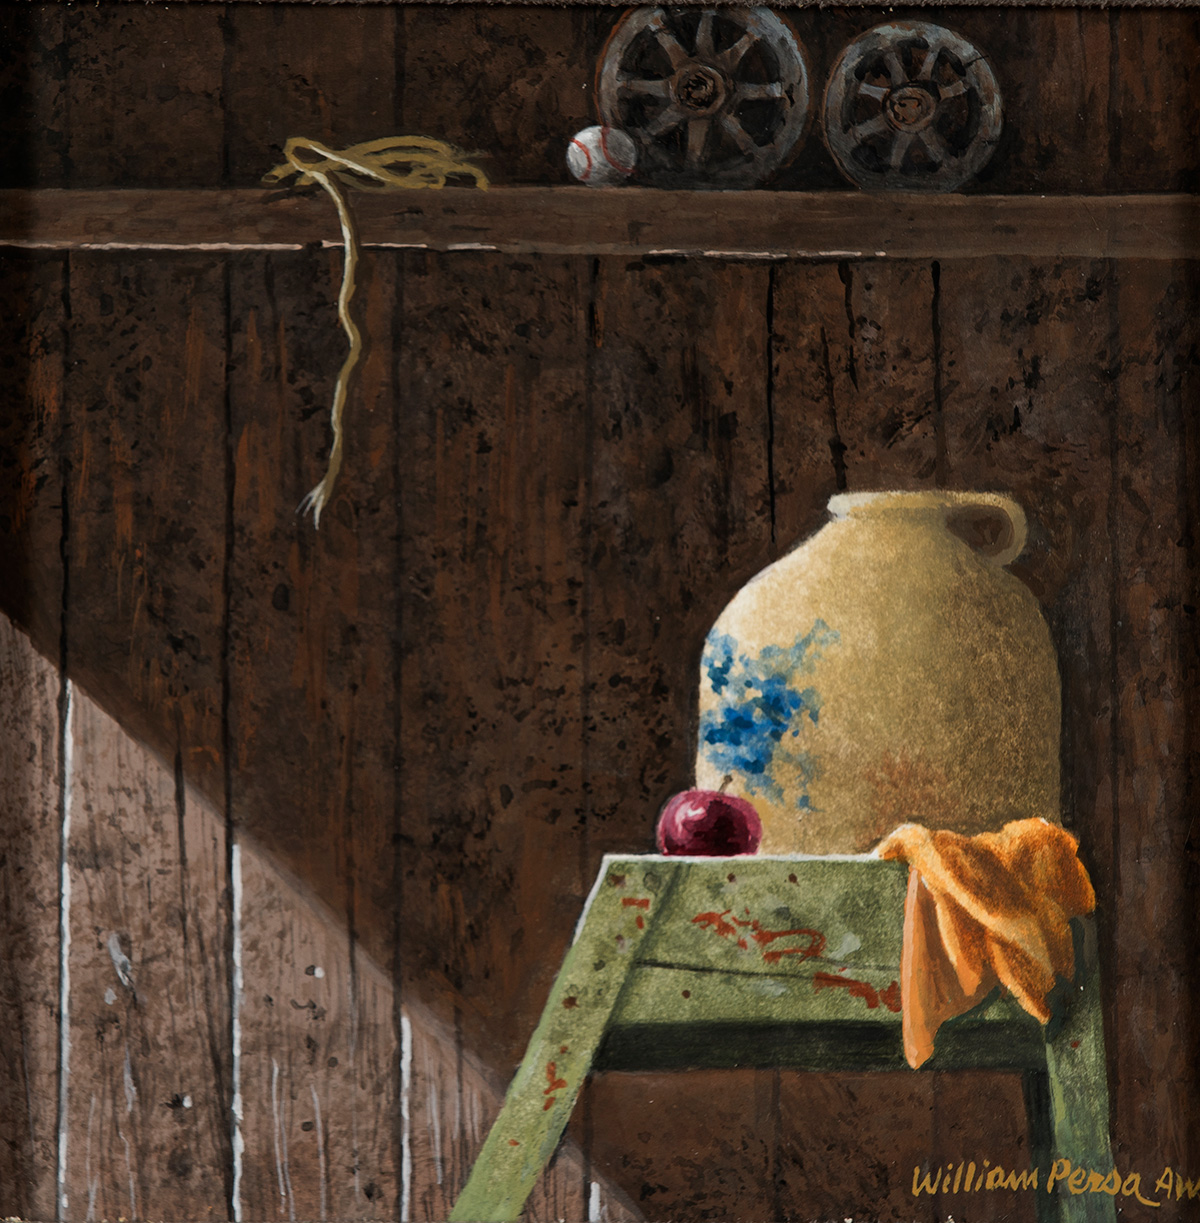 Study of Crock in the Barn Image